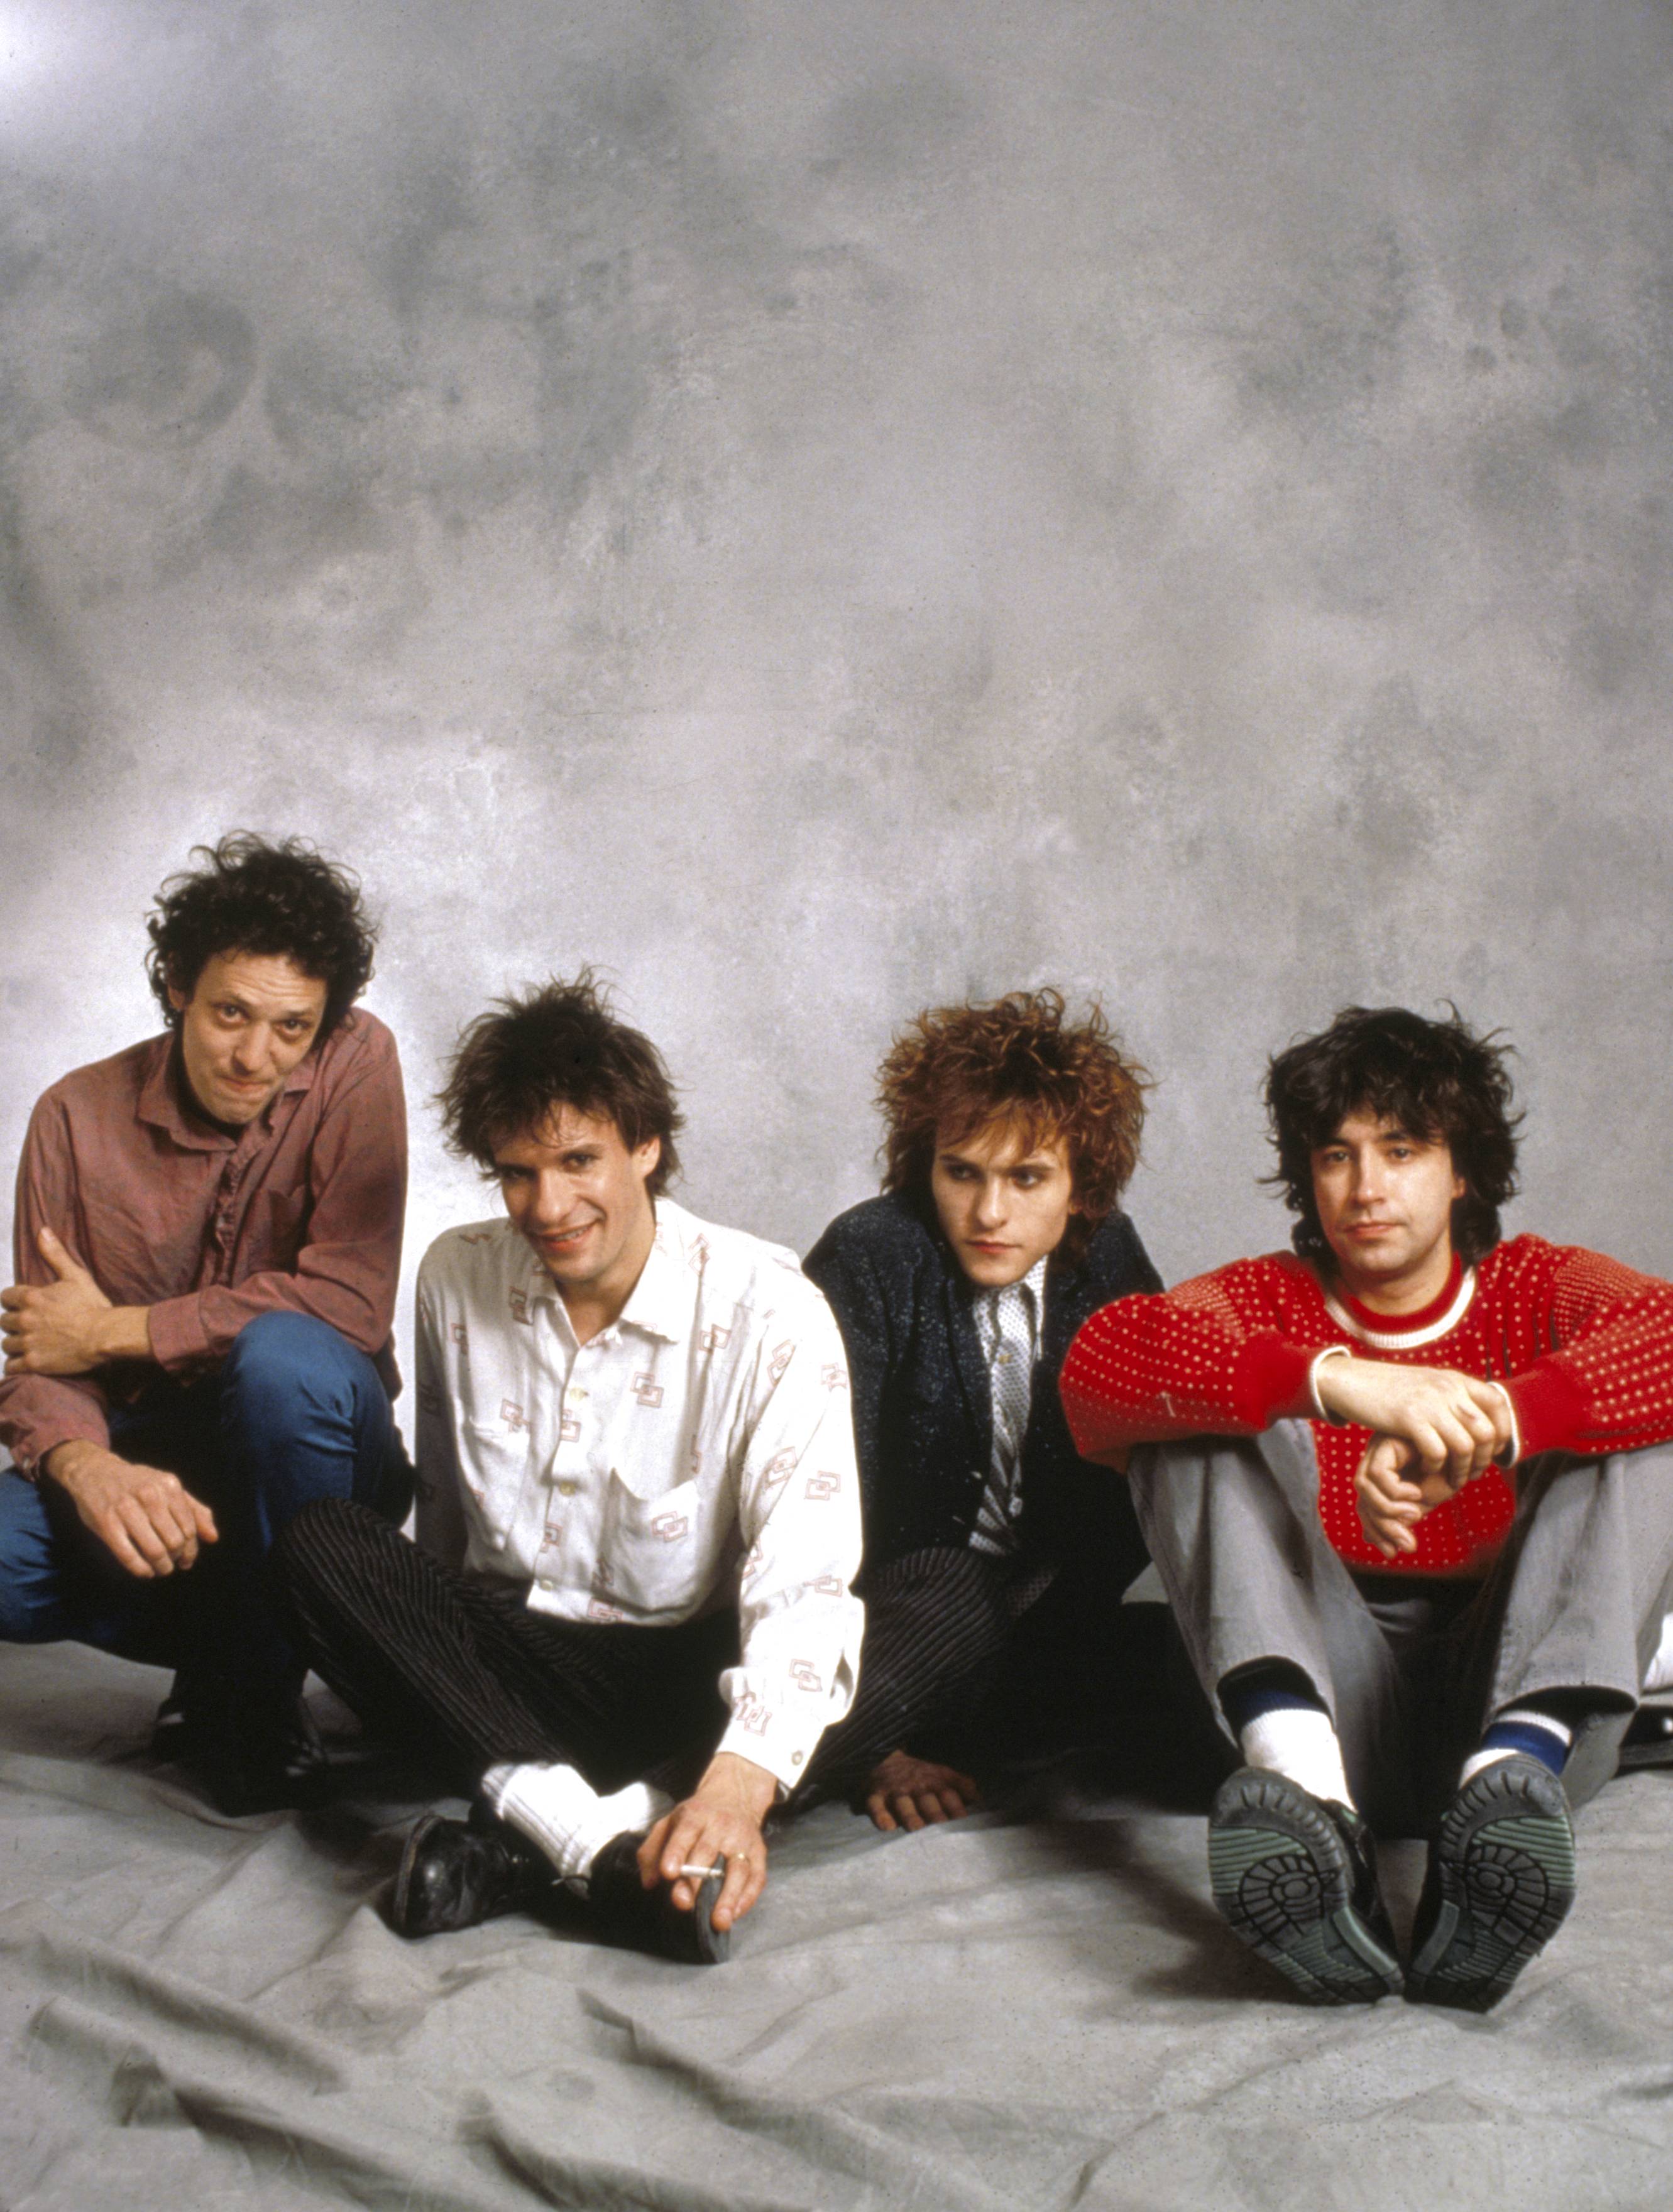 The Replacements: Our 1987 Feature, <i>
<p>Jesperson likewise had been with the group since the beginning. In 1980, less than a month after their first gig, he signed them to Twin/Tone Records, which he had cofounded, and immediately became their manager. But when they jumped to Warner Brothers in 1985, they moved beyond his managerial depth. Jesperson and the band went their separate ways last August, a move Westerberg feels was, in many ways, harder to digest than the decision fire Stinson.</p>
<p>“Peter was like a fifth member of the band, and in the beginning, I’d give him a lot of credit for our success. He was invaluable. When we had no money at all, he would always buy us drinks and lunch and things like that. He kept us together in the beginning. And then we grew up a little. We were young when we started—I was 19, Tommy was 13, and he was six or seven years older, and he could calm us down when we needed it. Consequently, we grew up to the point where we could call ’em ourselves. We didn’t need a ‘dad’ or a ‘big brother’ anymore; we needed someone to guid our career more than we needed someone to take care of us.”</p>
<p>Warner Brothers provided the career-guiding management to replace Jesperson. To fill the void Stinson left, the band chose Bob “Slim” Dunlap, longtime sidekick of local legend Curtiss A. His “audition” consisted of an afternoon of drinking beer.</p>
<p>“Slim is more like a fourth member of the band than a hired gun,” Westerberg says. “We originally thought that it would be a good idea to get a hot guitar player and be the Replacements and…Joe Blow. As it is now, it’s like the Replacements with a new guy who isn’t a <i>great</i> guitar player, isn’t a <i>great</i> singer, just as we are not great at what we do, and he fits in perfectly. He’s working out good, but the tale will really be told when we play live.”</p>
<p><iframe title=